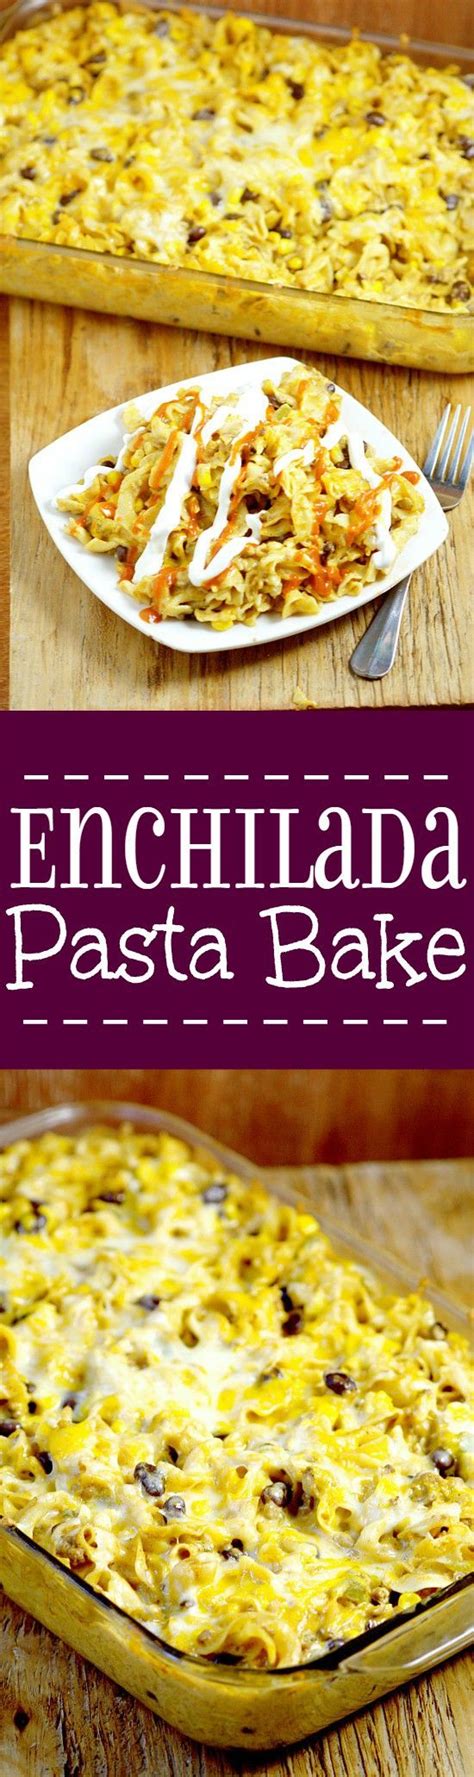 Enchilada Pasta Bake Recipe Is A Delicious Way To Use Up